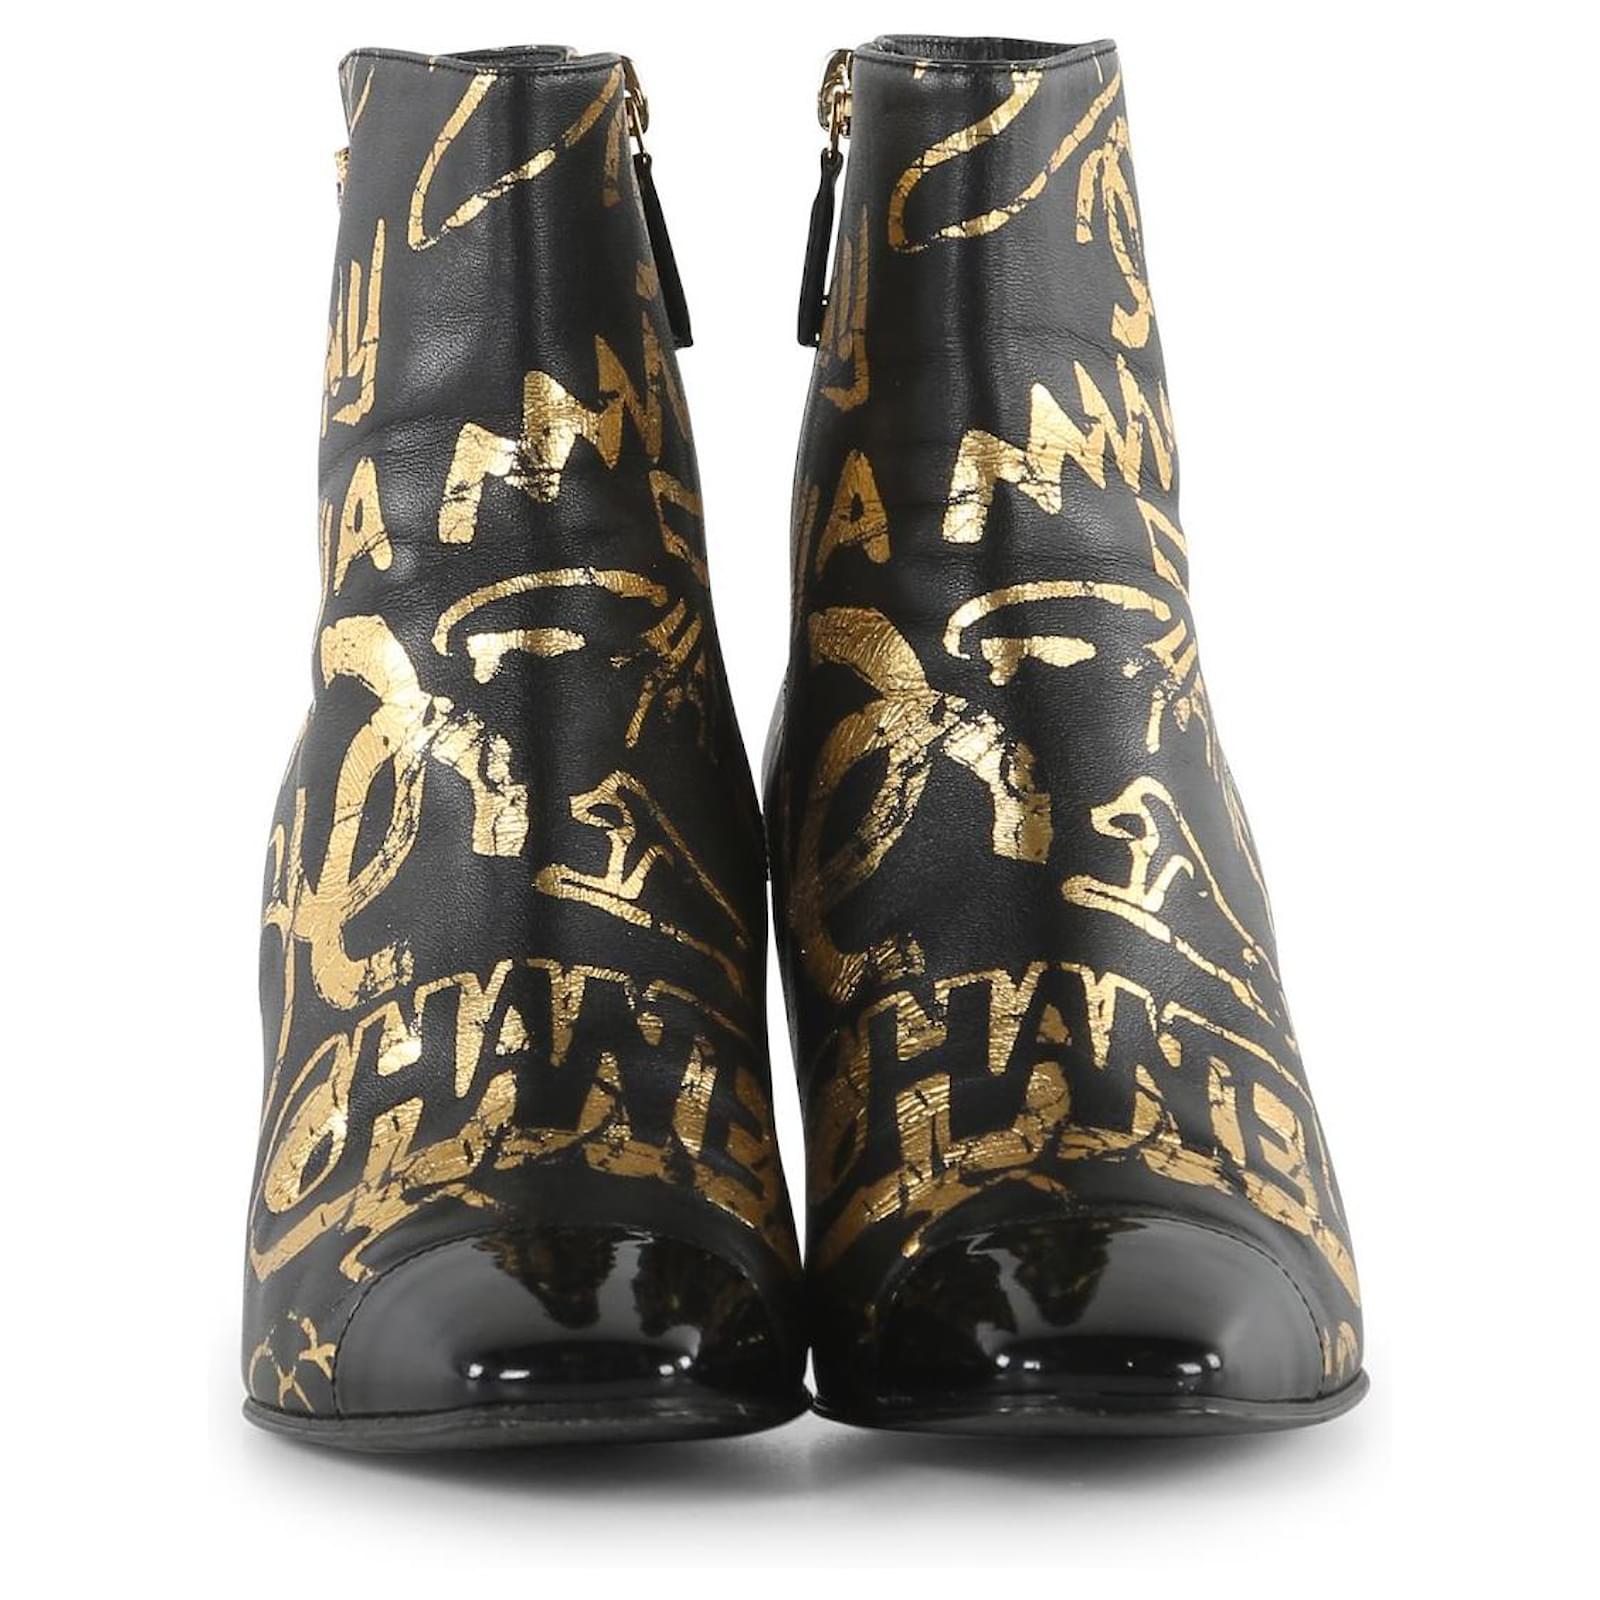 Chanel Black and Metallic Gold Leather Graffiti Ankle Booties